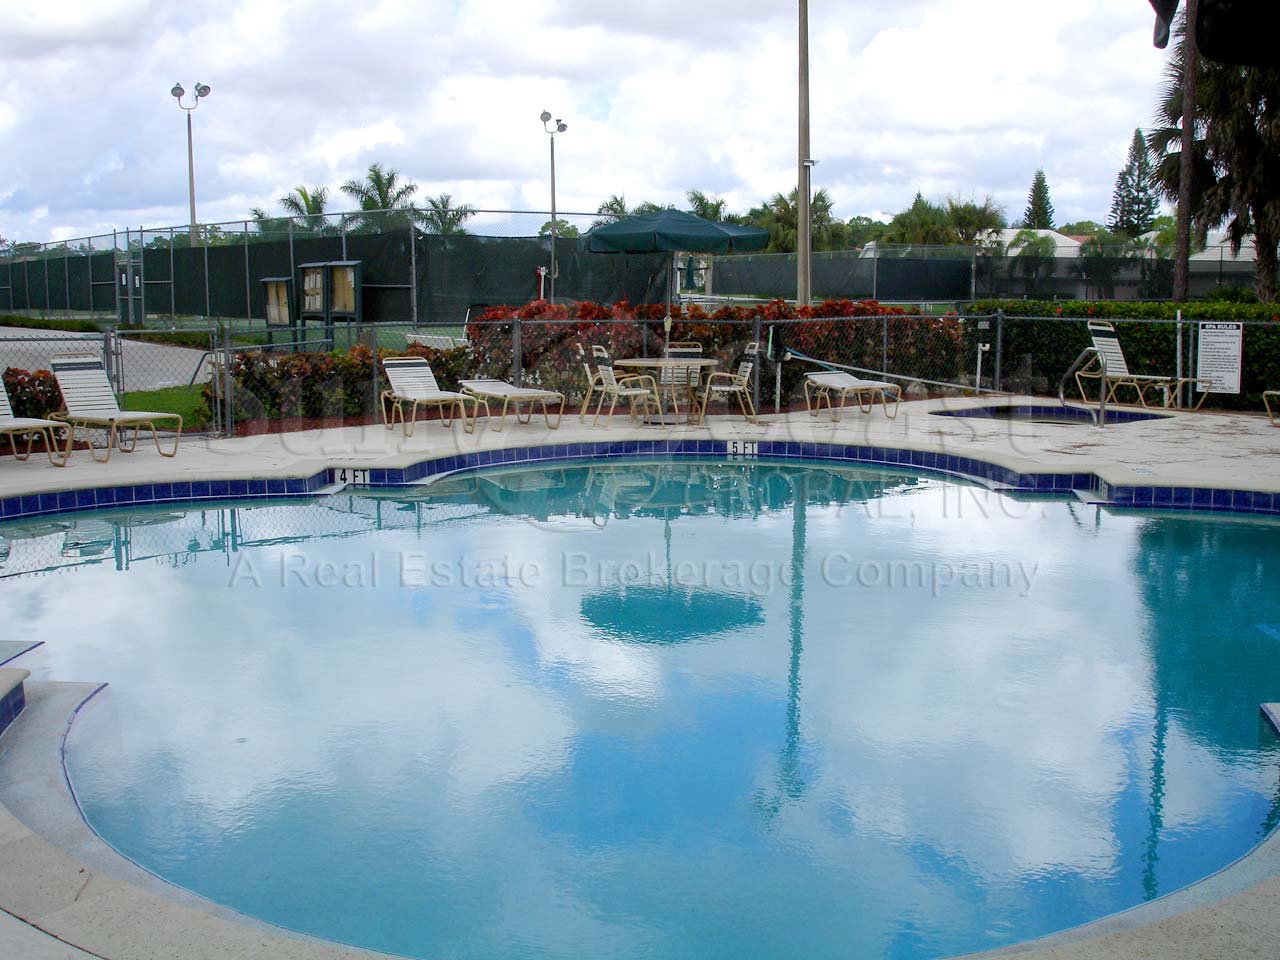 ROYAL WOOD Golf and Country Club 3-6 foot community pool and tennis courts